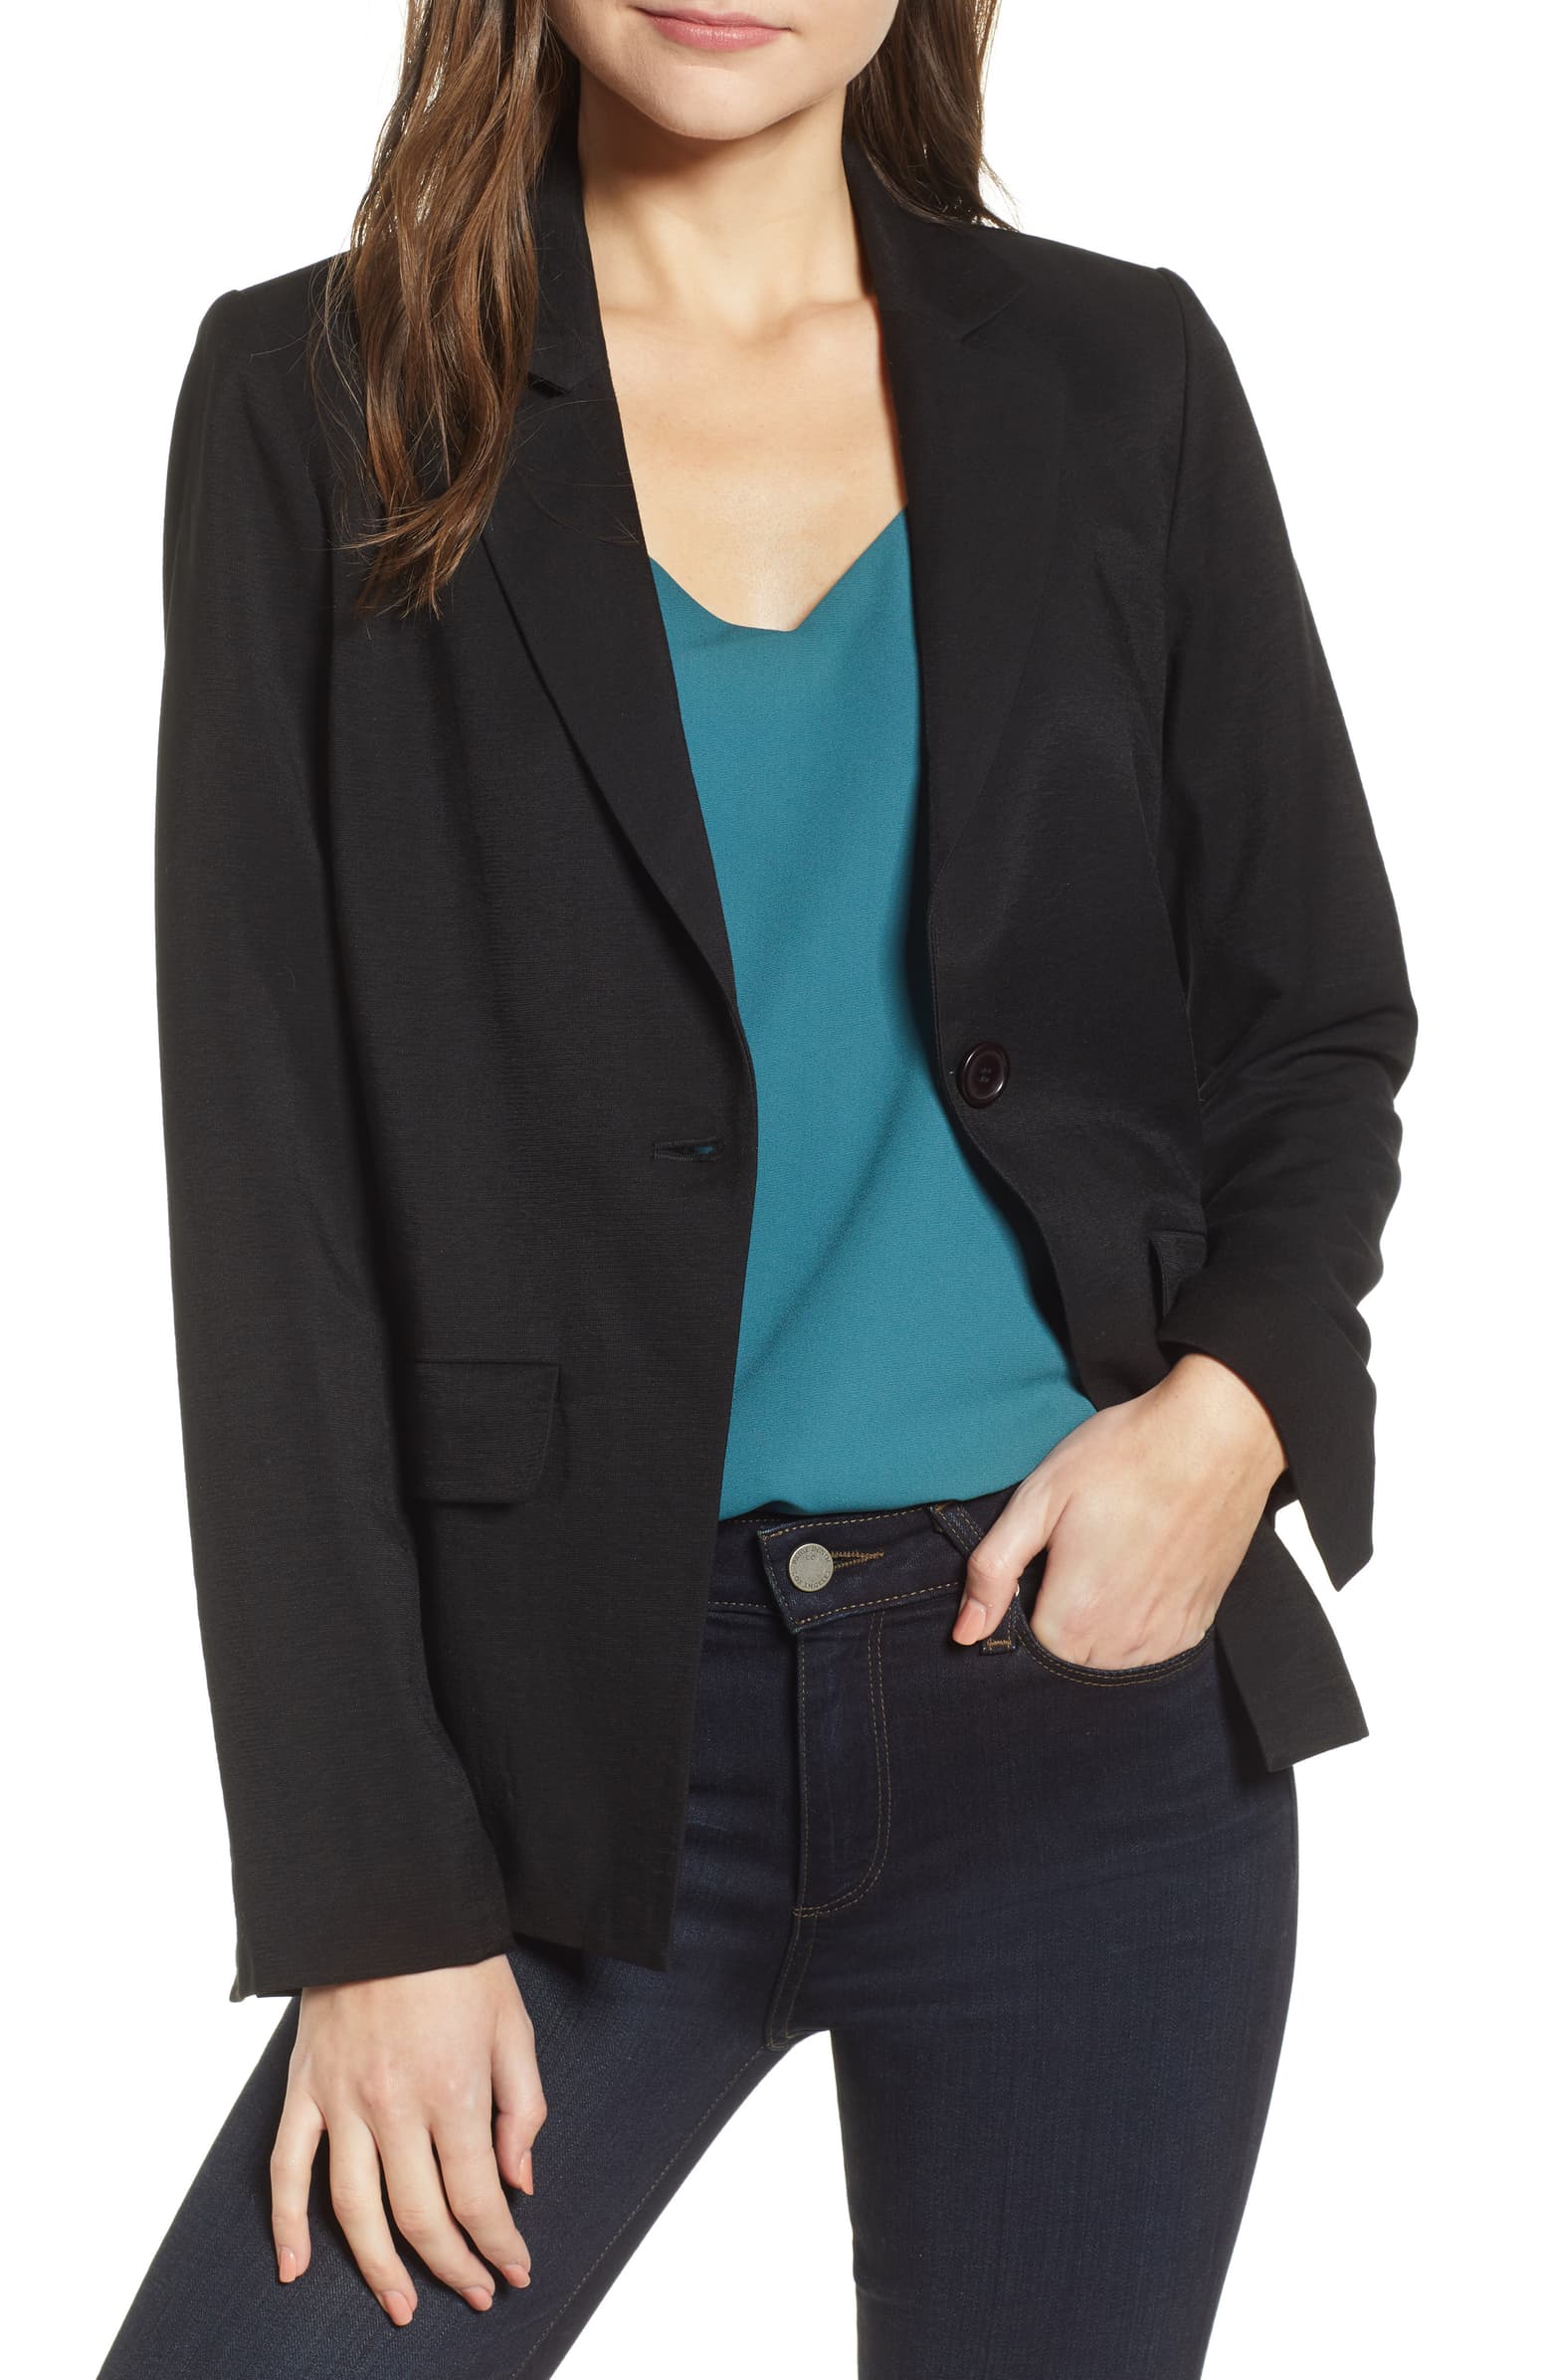 Score The Perfect Black Blazer For 55% Off Right Now–It’s So Flattering ...